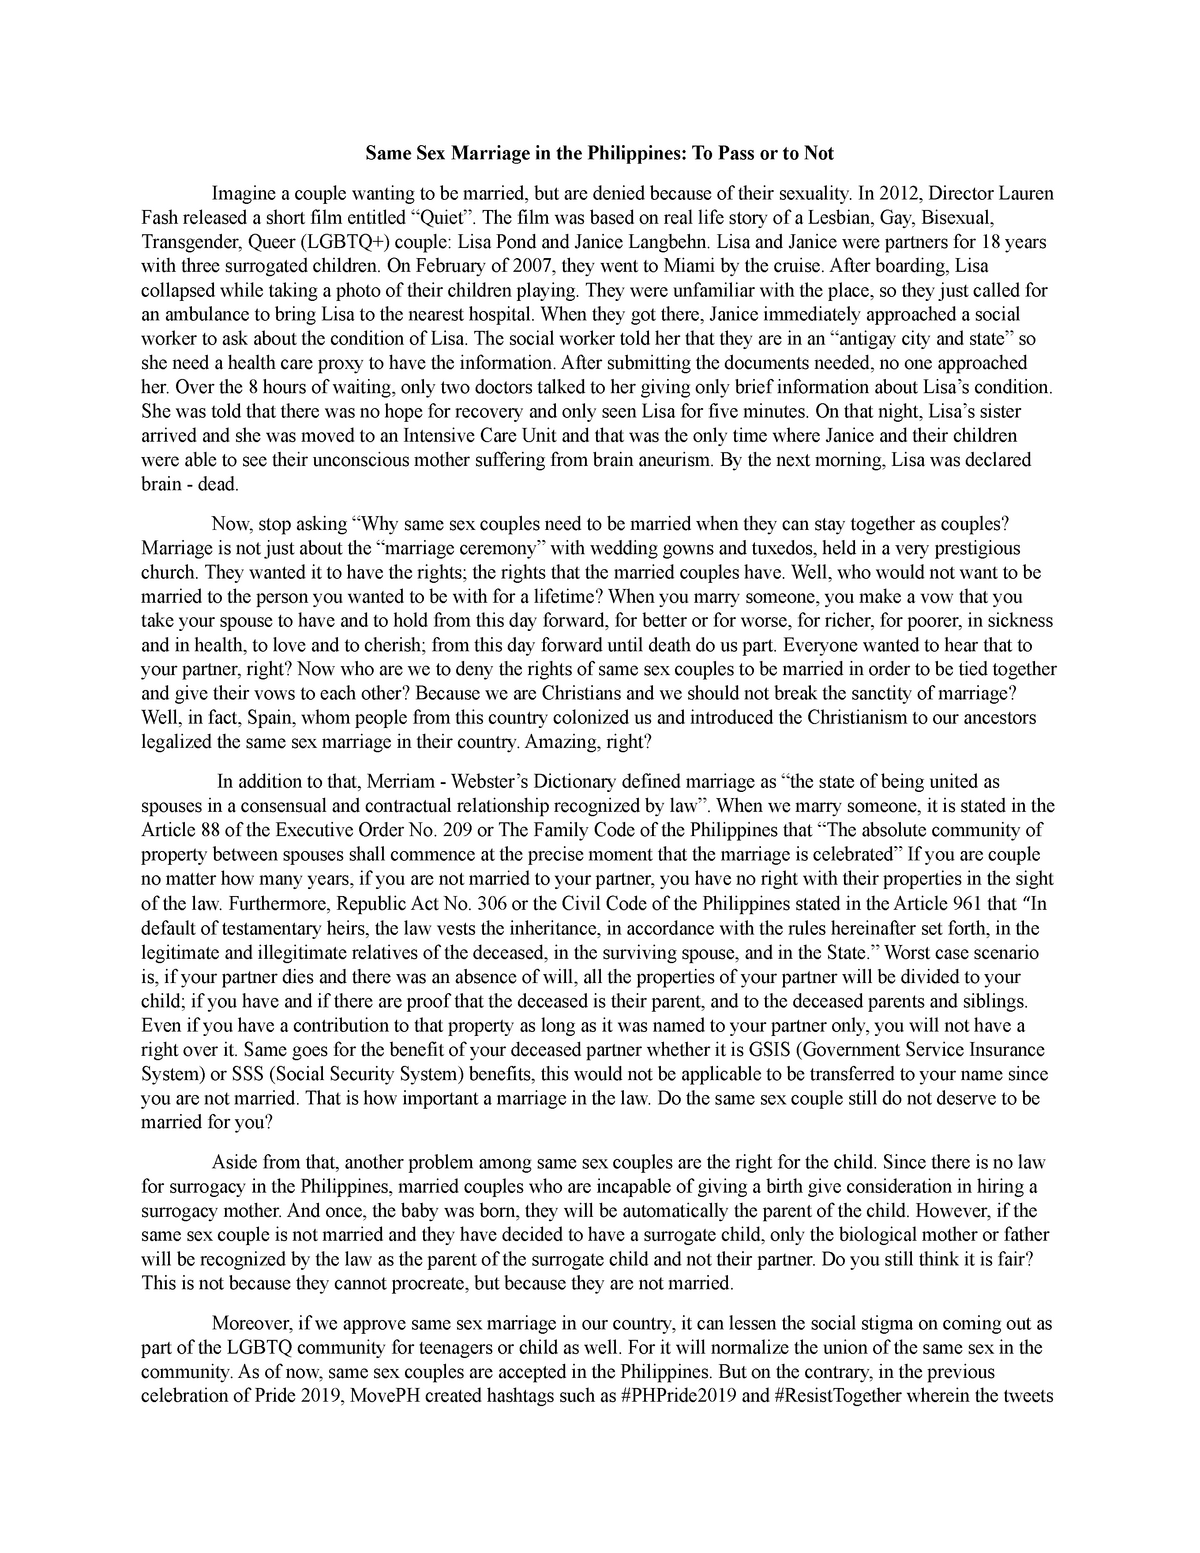 same sex marriage in the philippines thesis statement